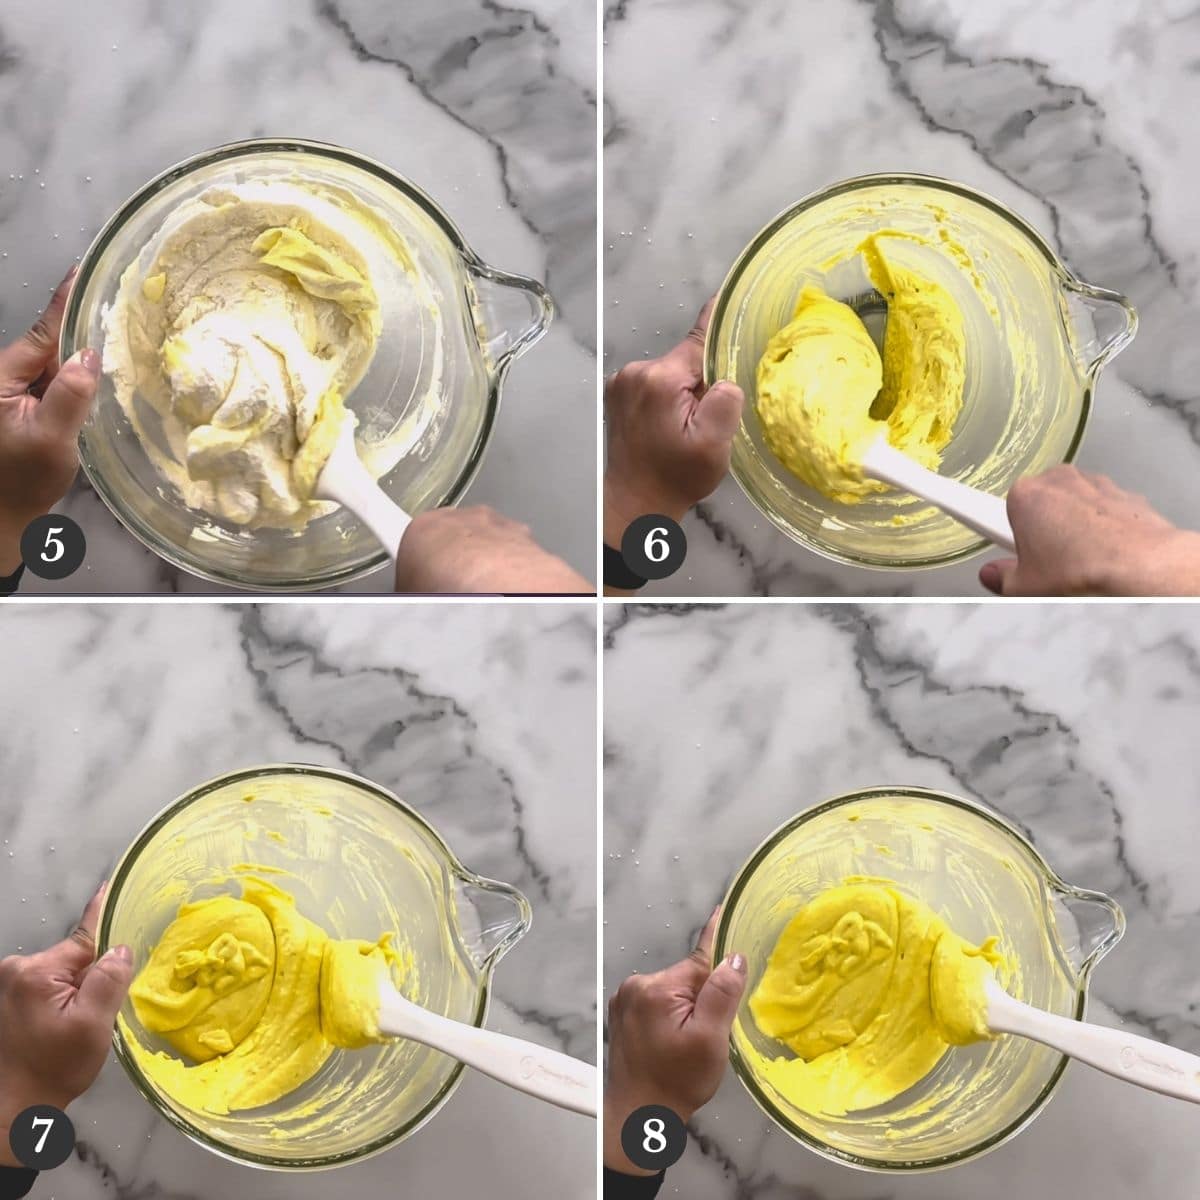 Step by step images of mixing yellow macaron batter.